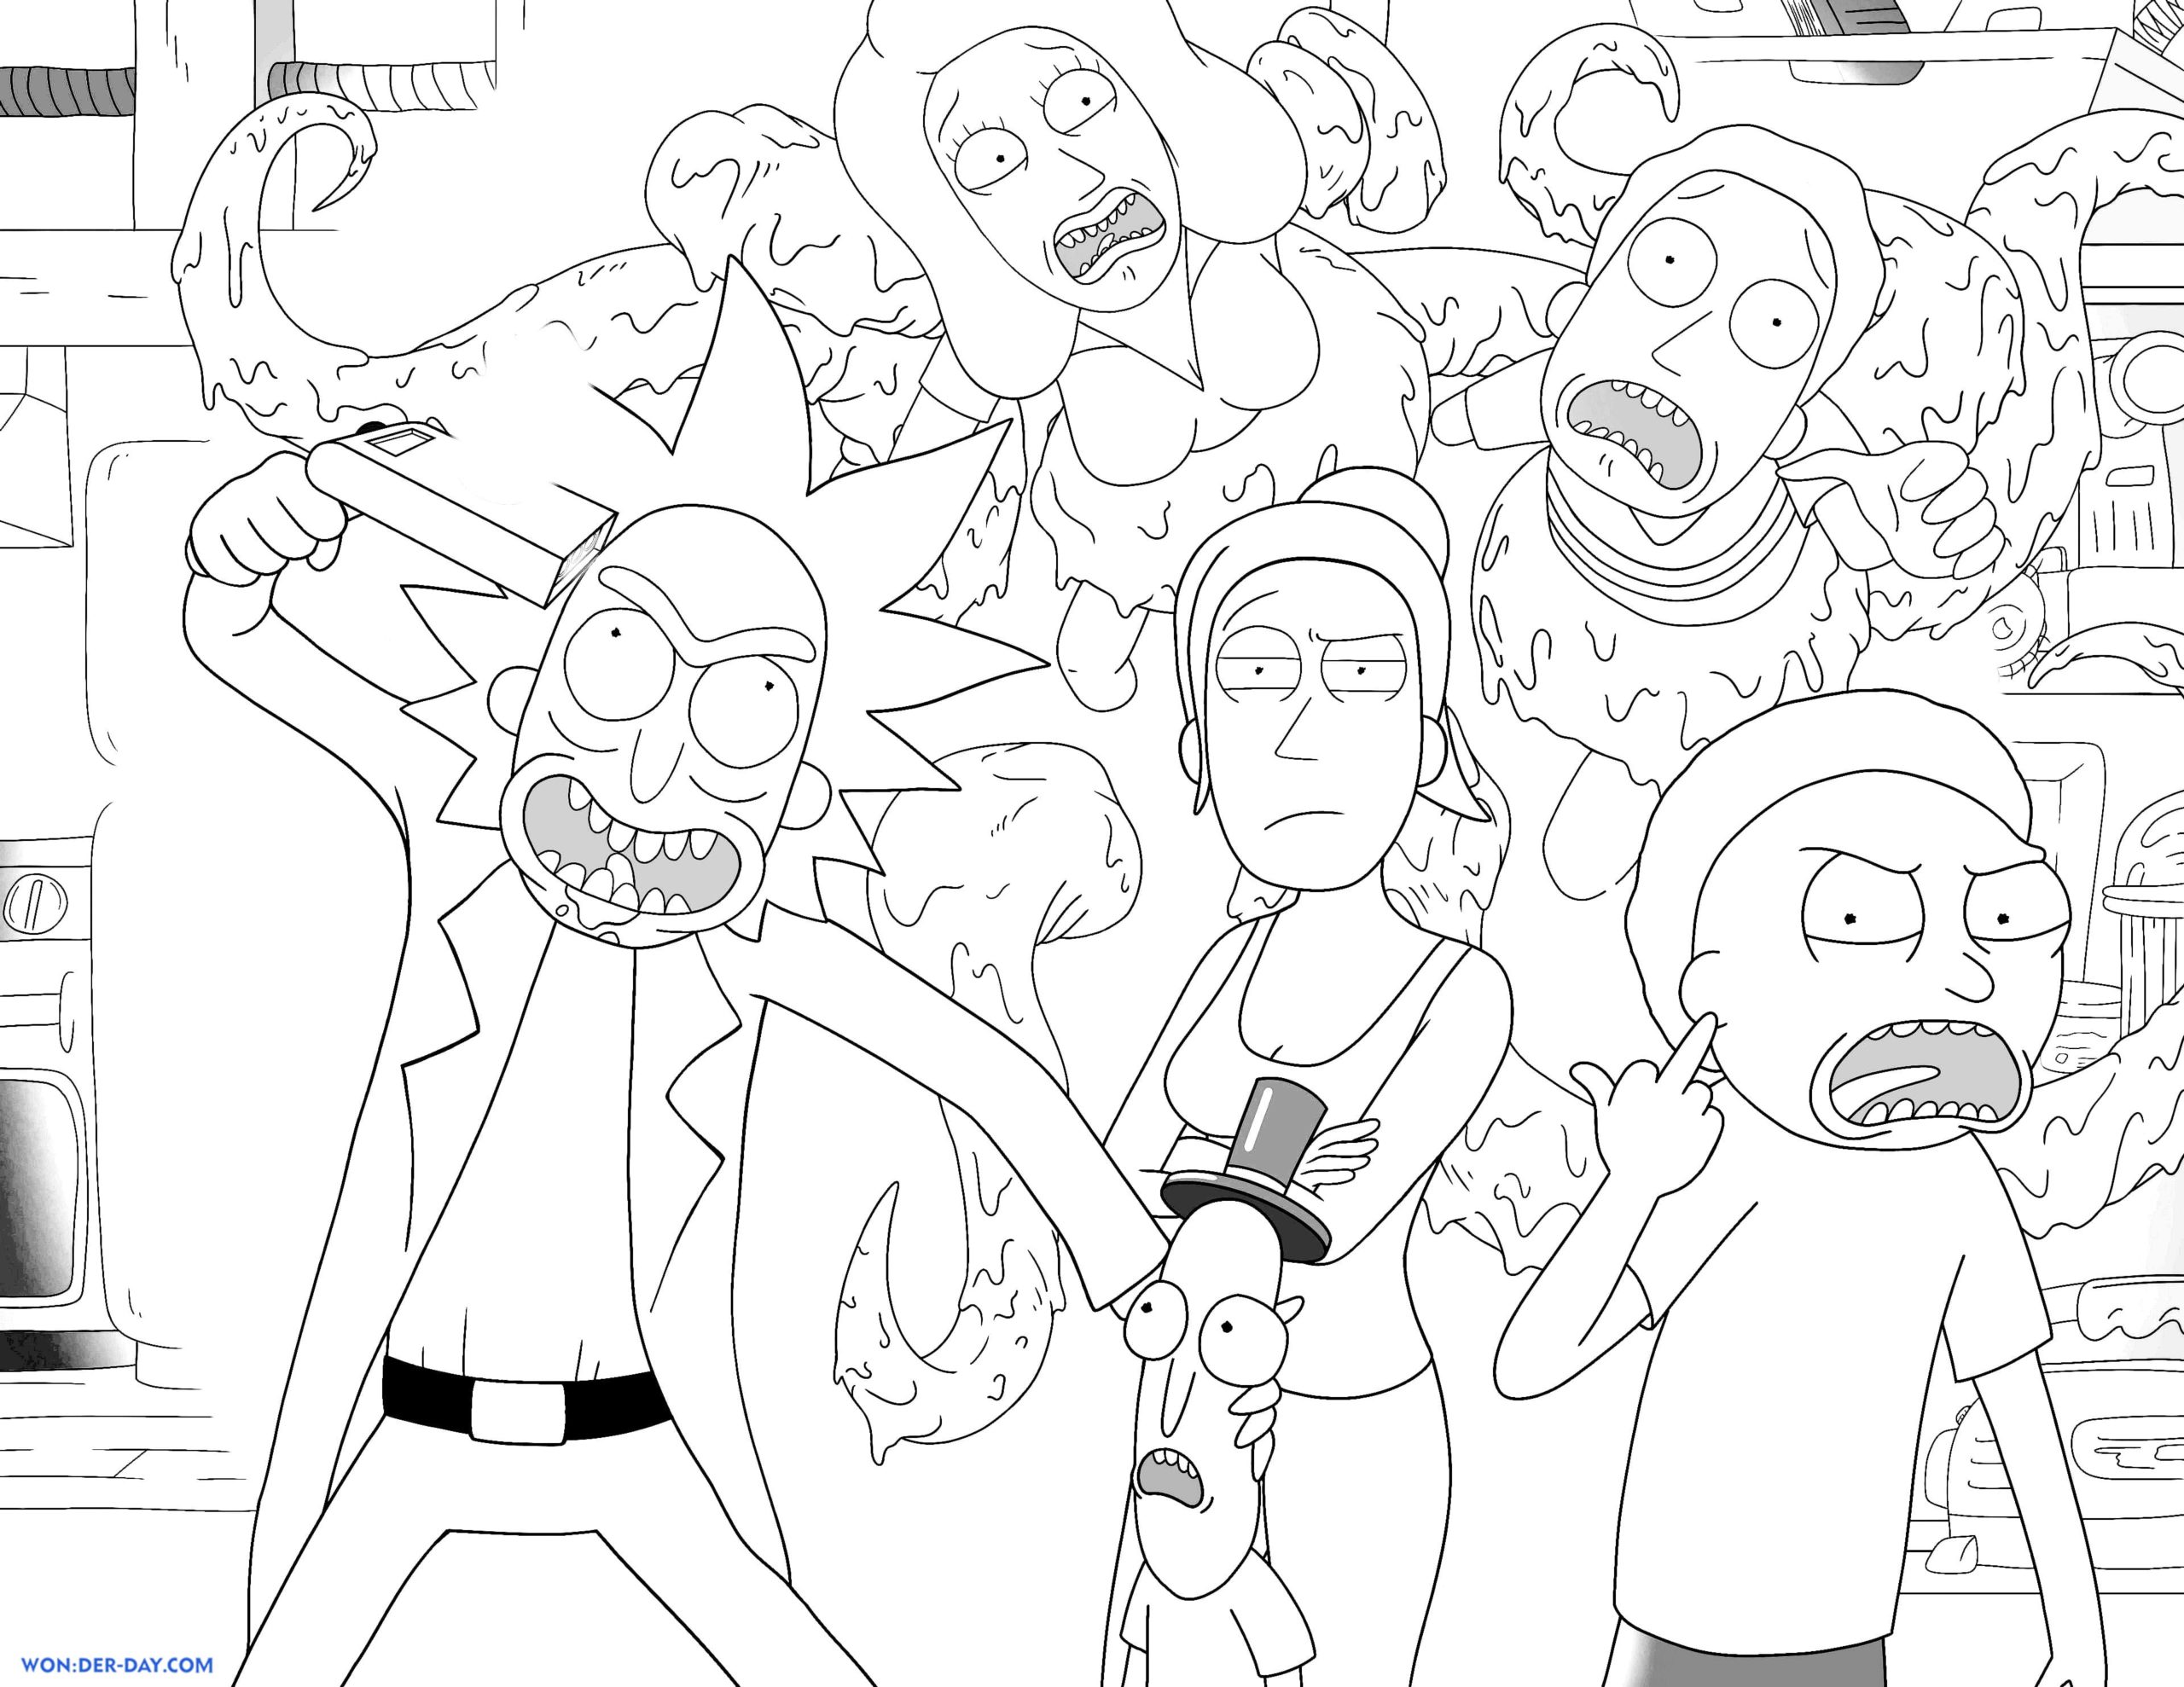 Rick and Morty coloring book.